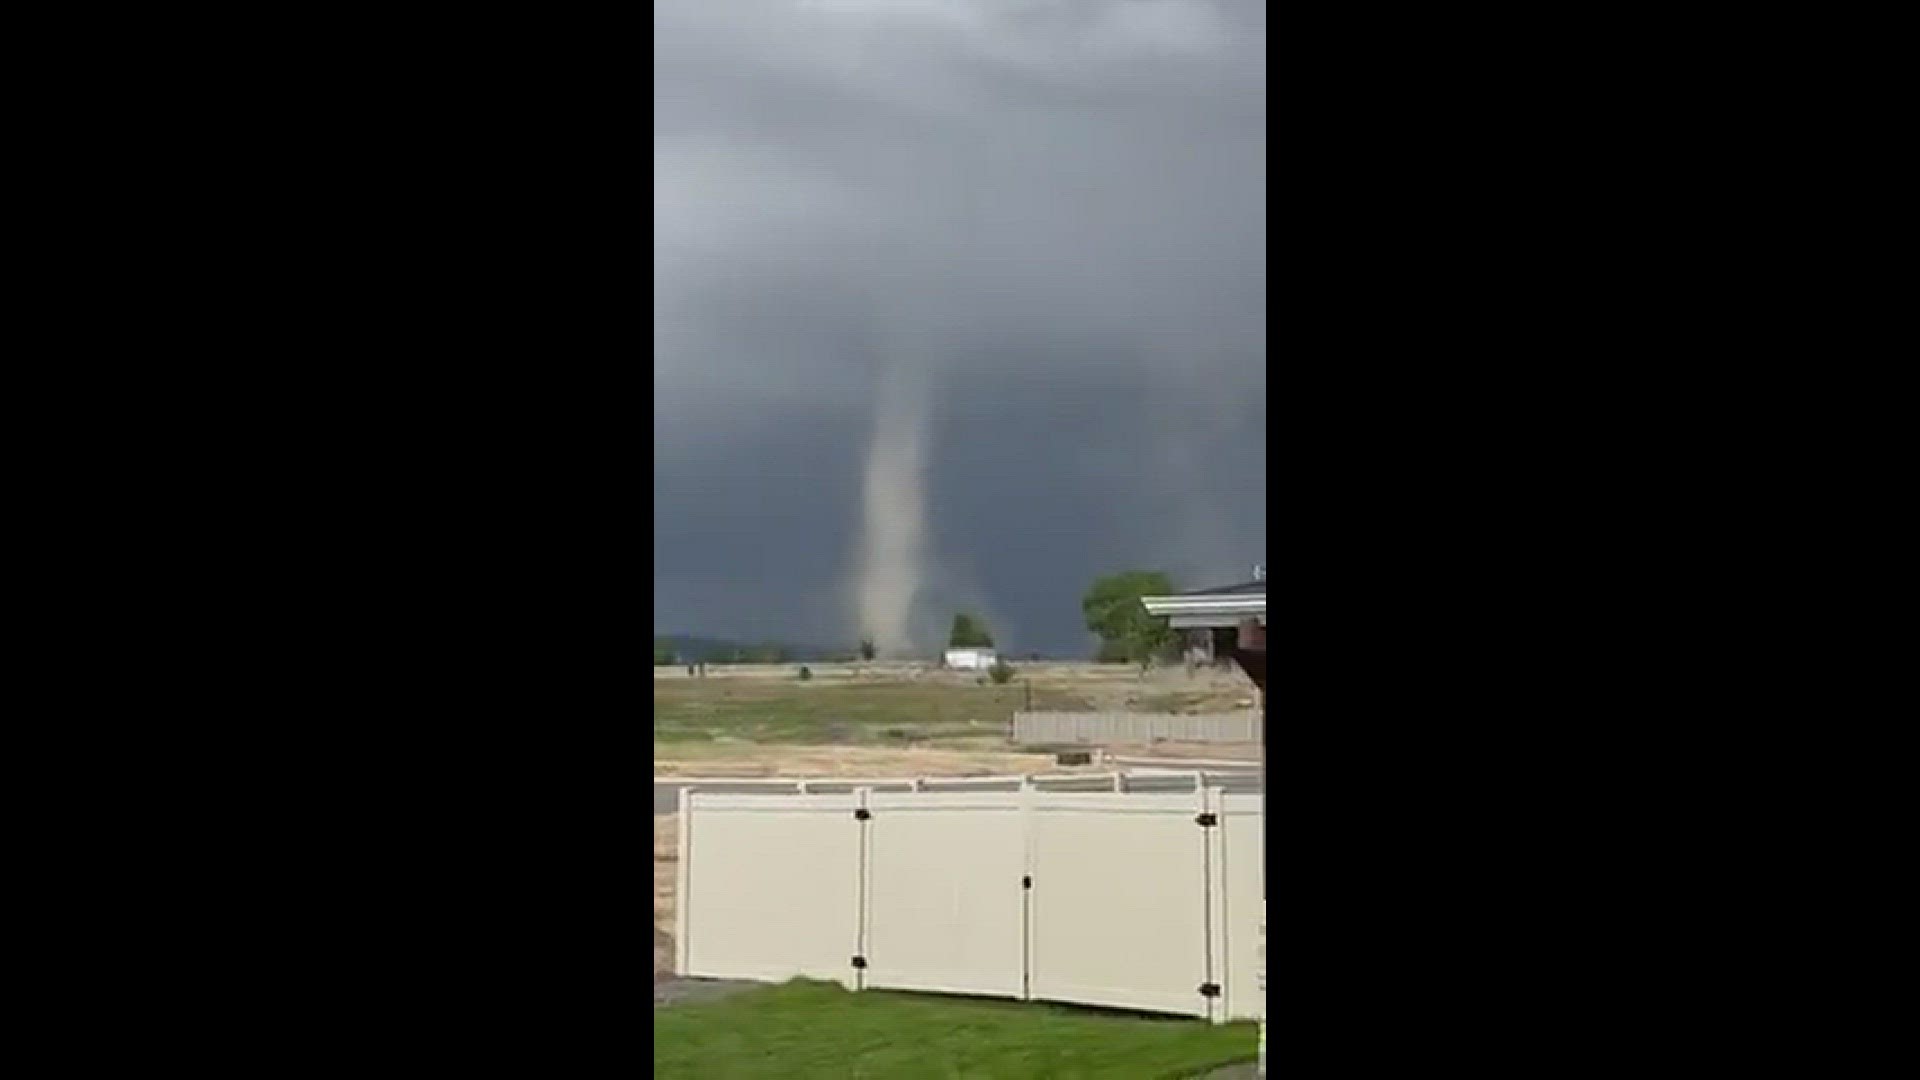 Video a tornado in star. Police stopped to make sure everyone was in a good place and that it didn’t get worse
Credit: Aaron Davis